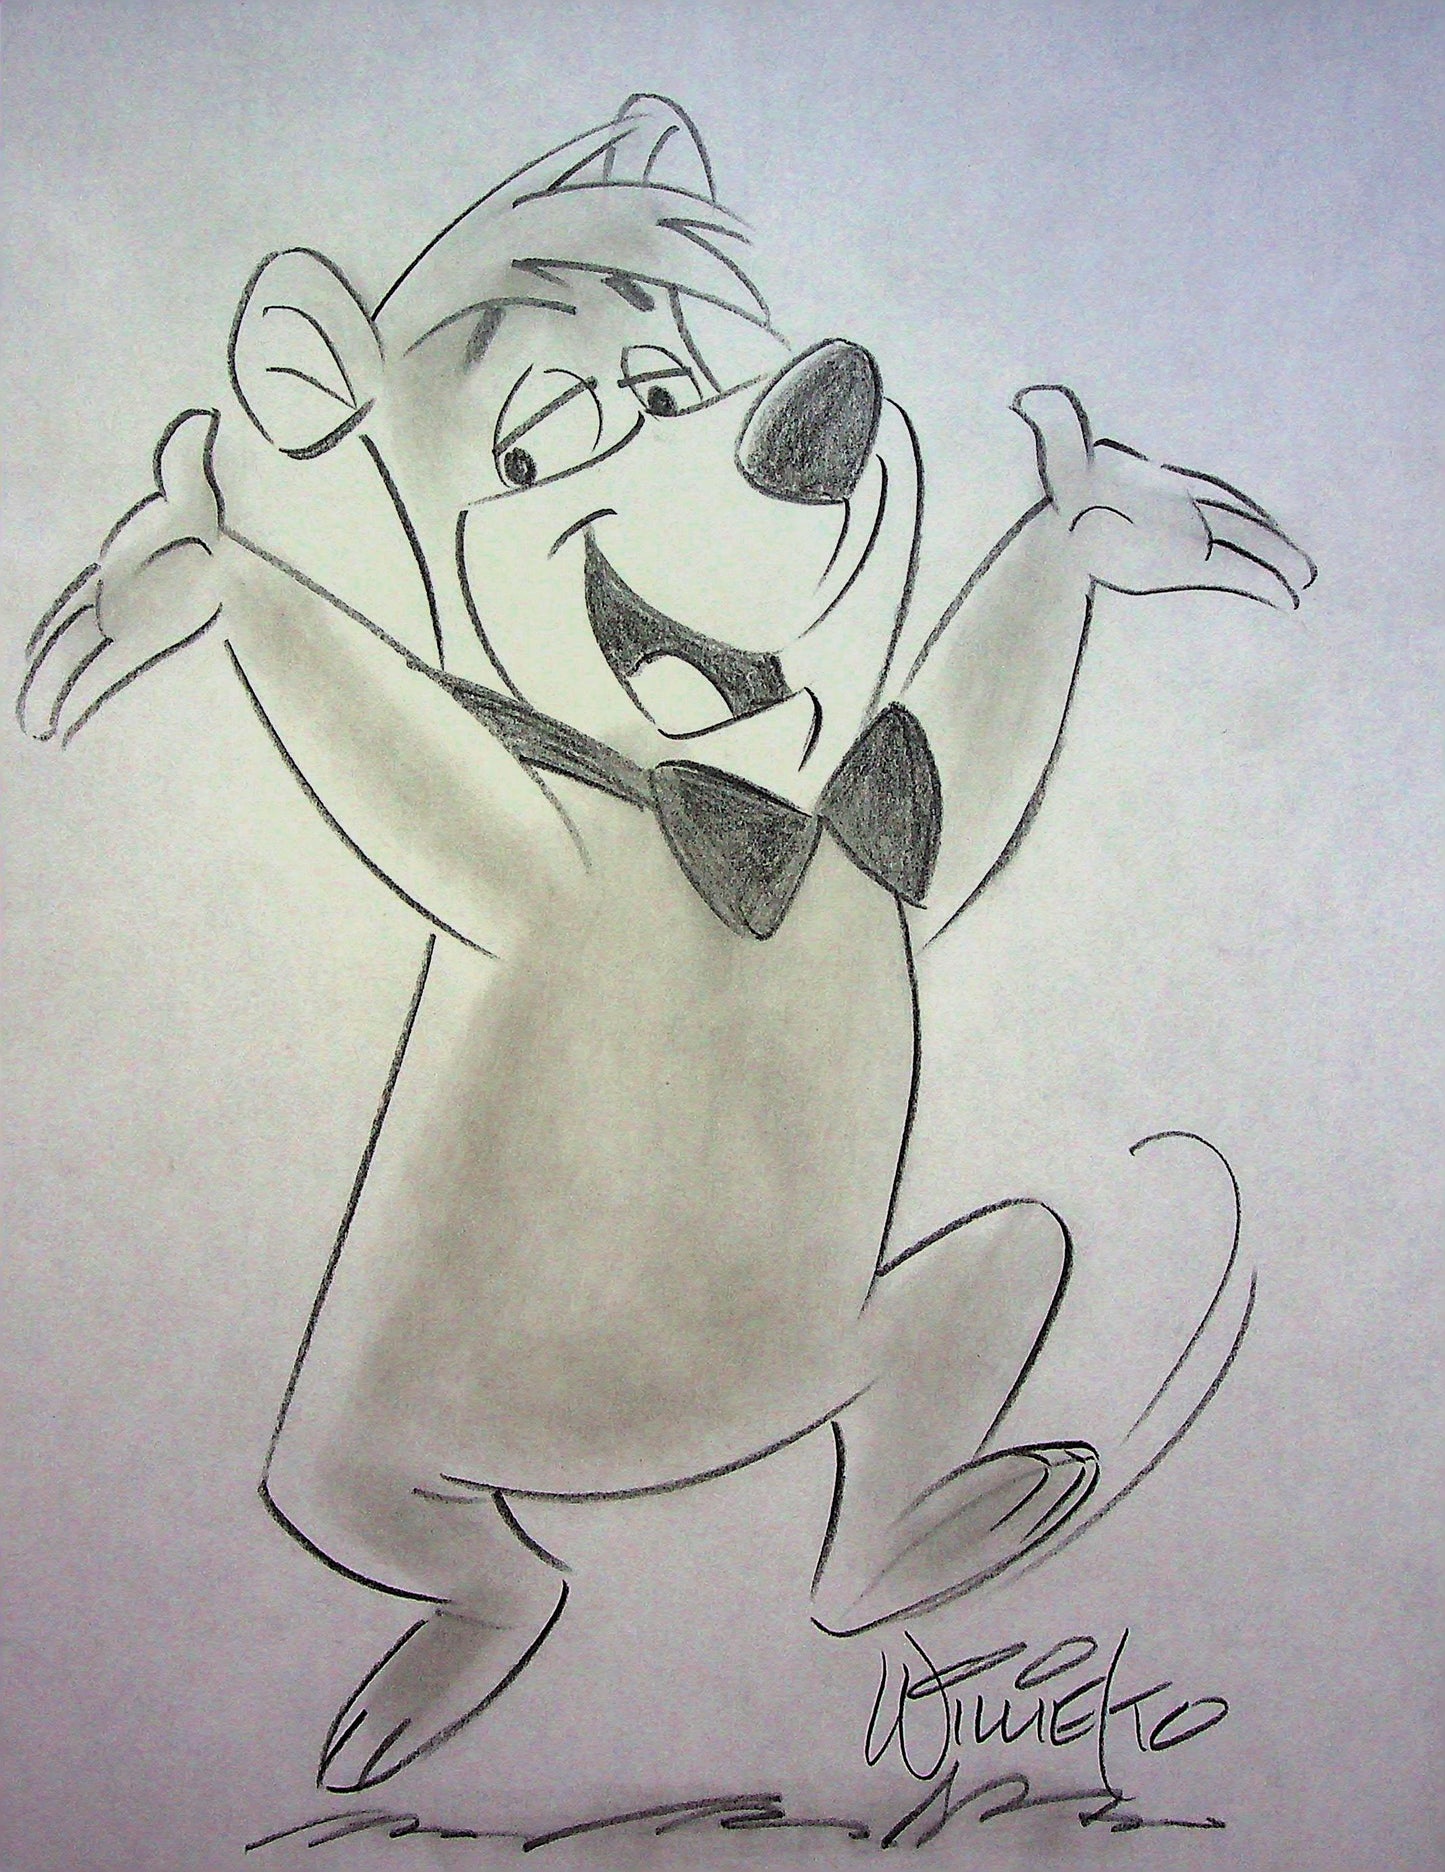 BOO-BOO BEAR Willie Ito Signed Hand Drawn Pencil Animation Art 8"x11"